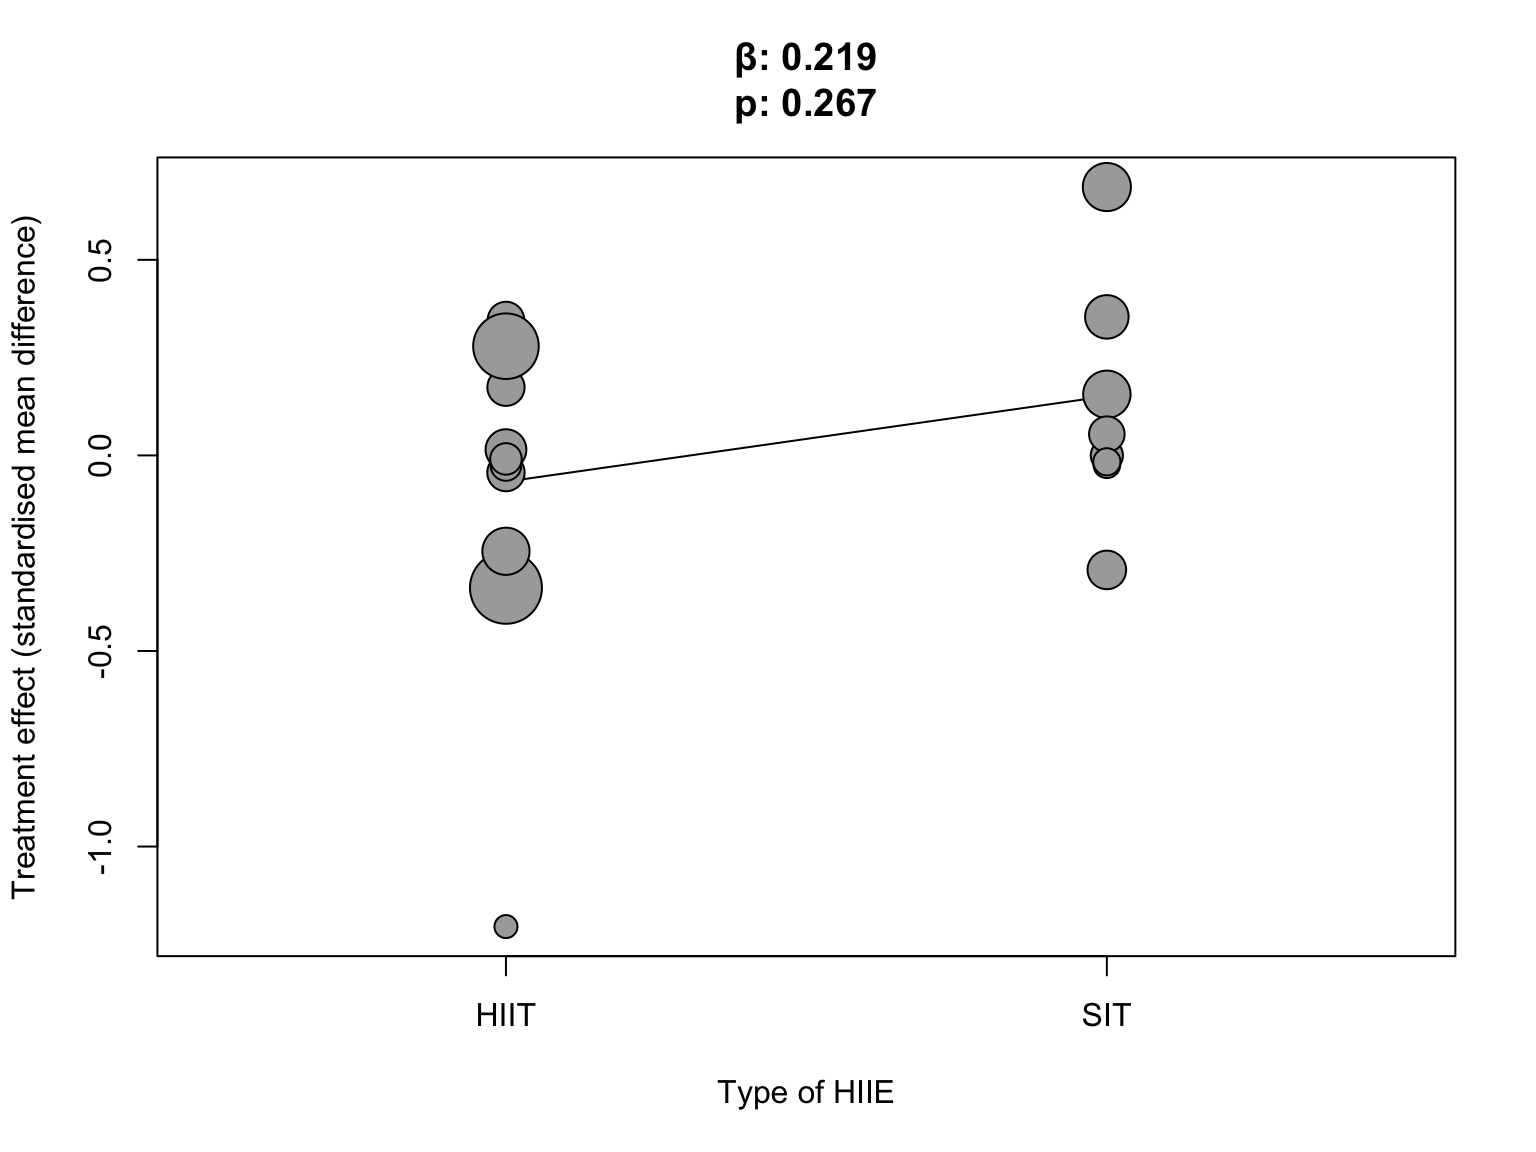 Bubble plot for the meta-regression for the subgroup analysis. The slope of the meta-regression (β) as well as the associated p-value are printed at the top of the graph.